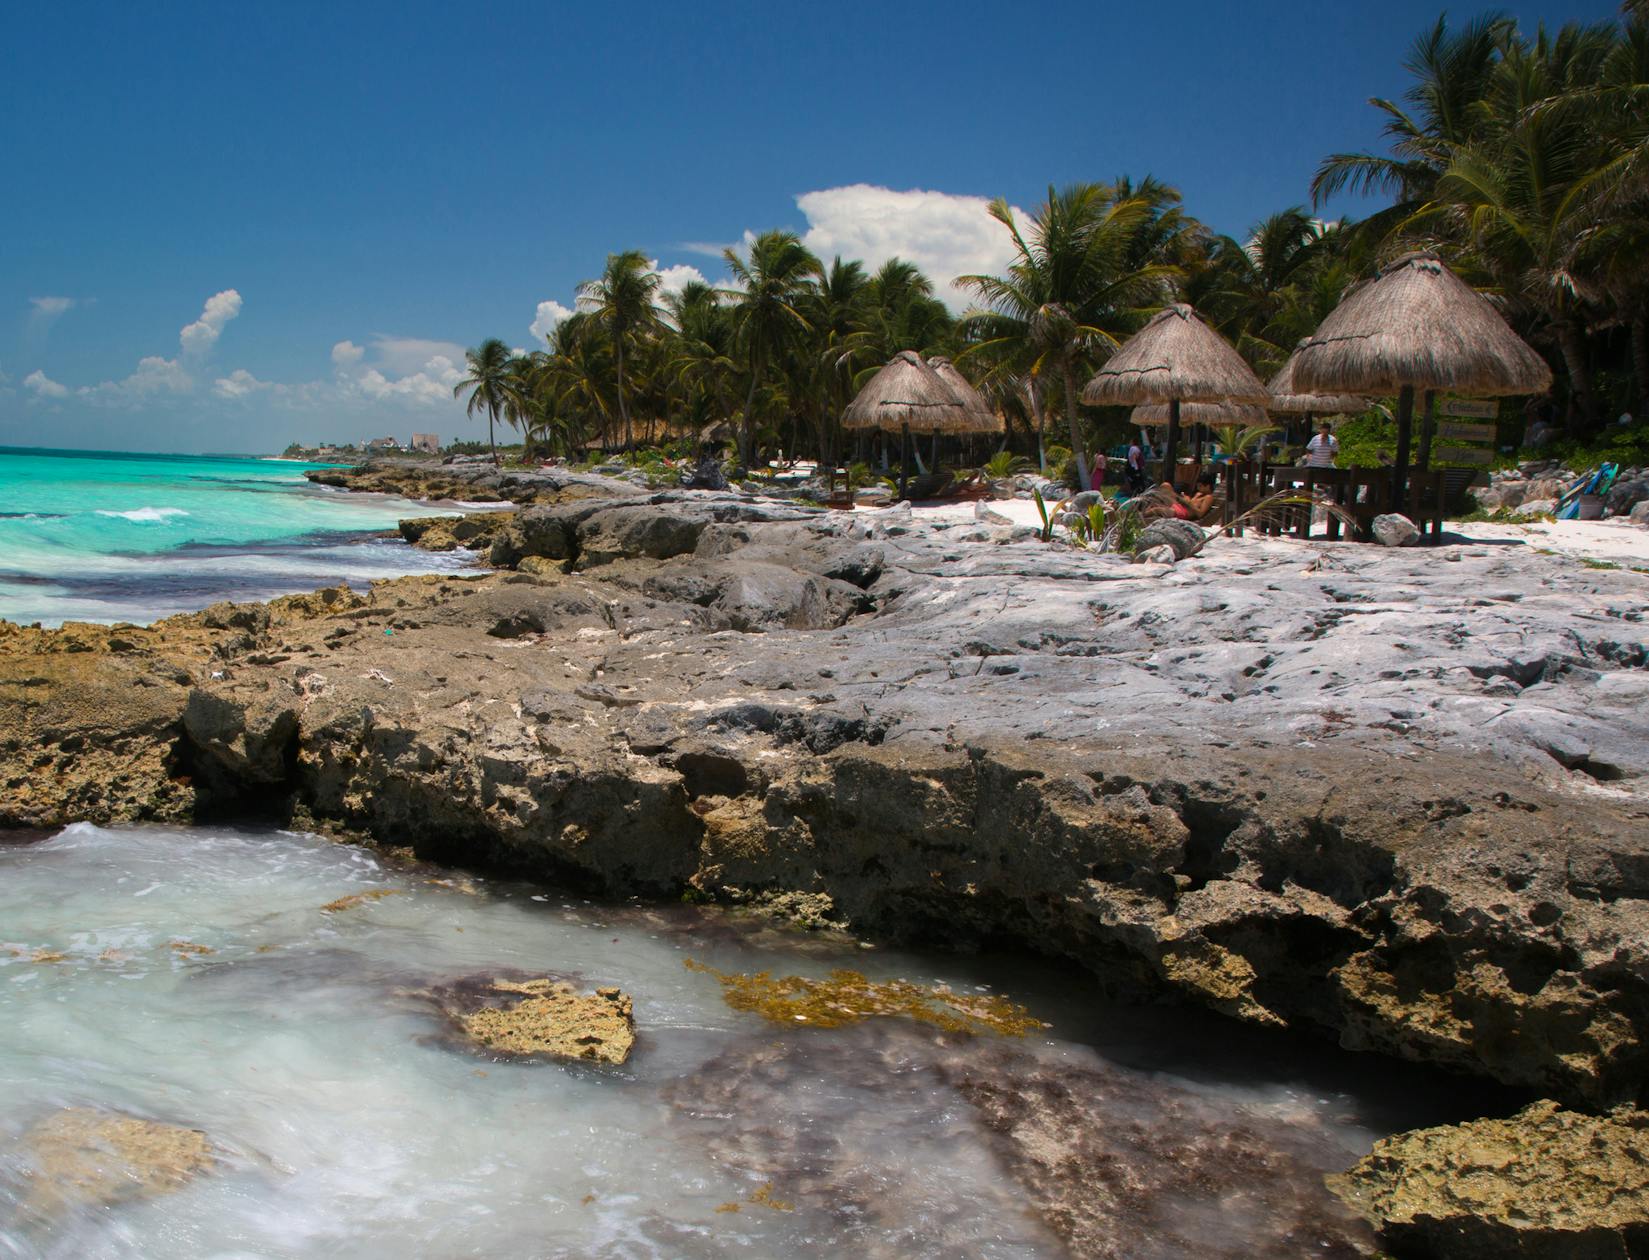 Delta adds service from Minneapolis to laid-back Tulum, Mexico